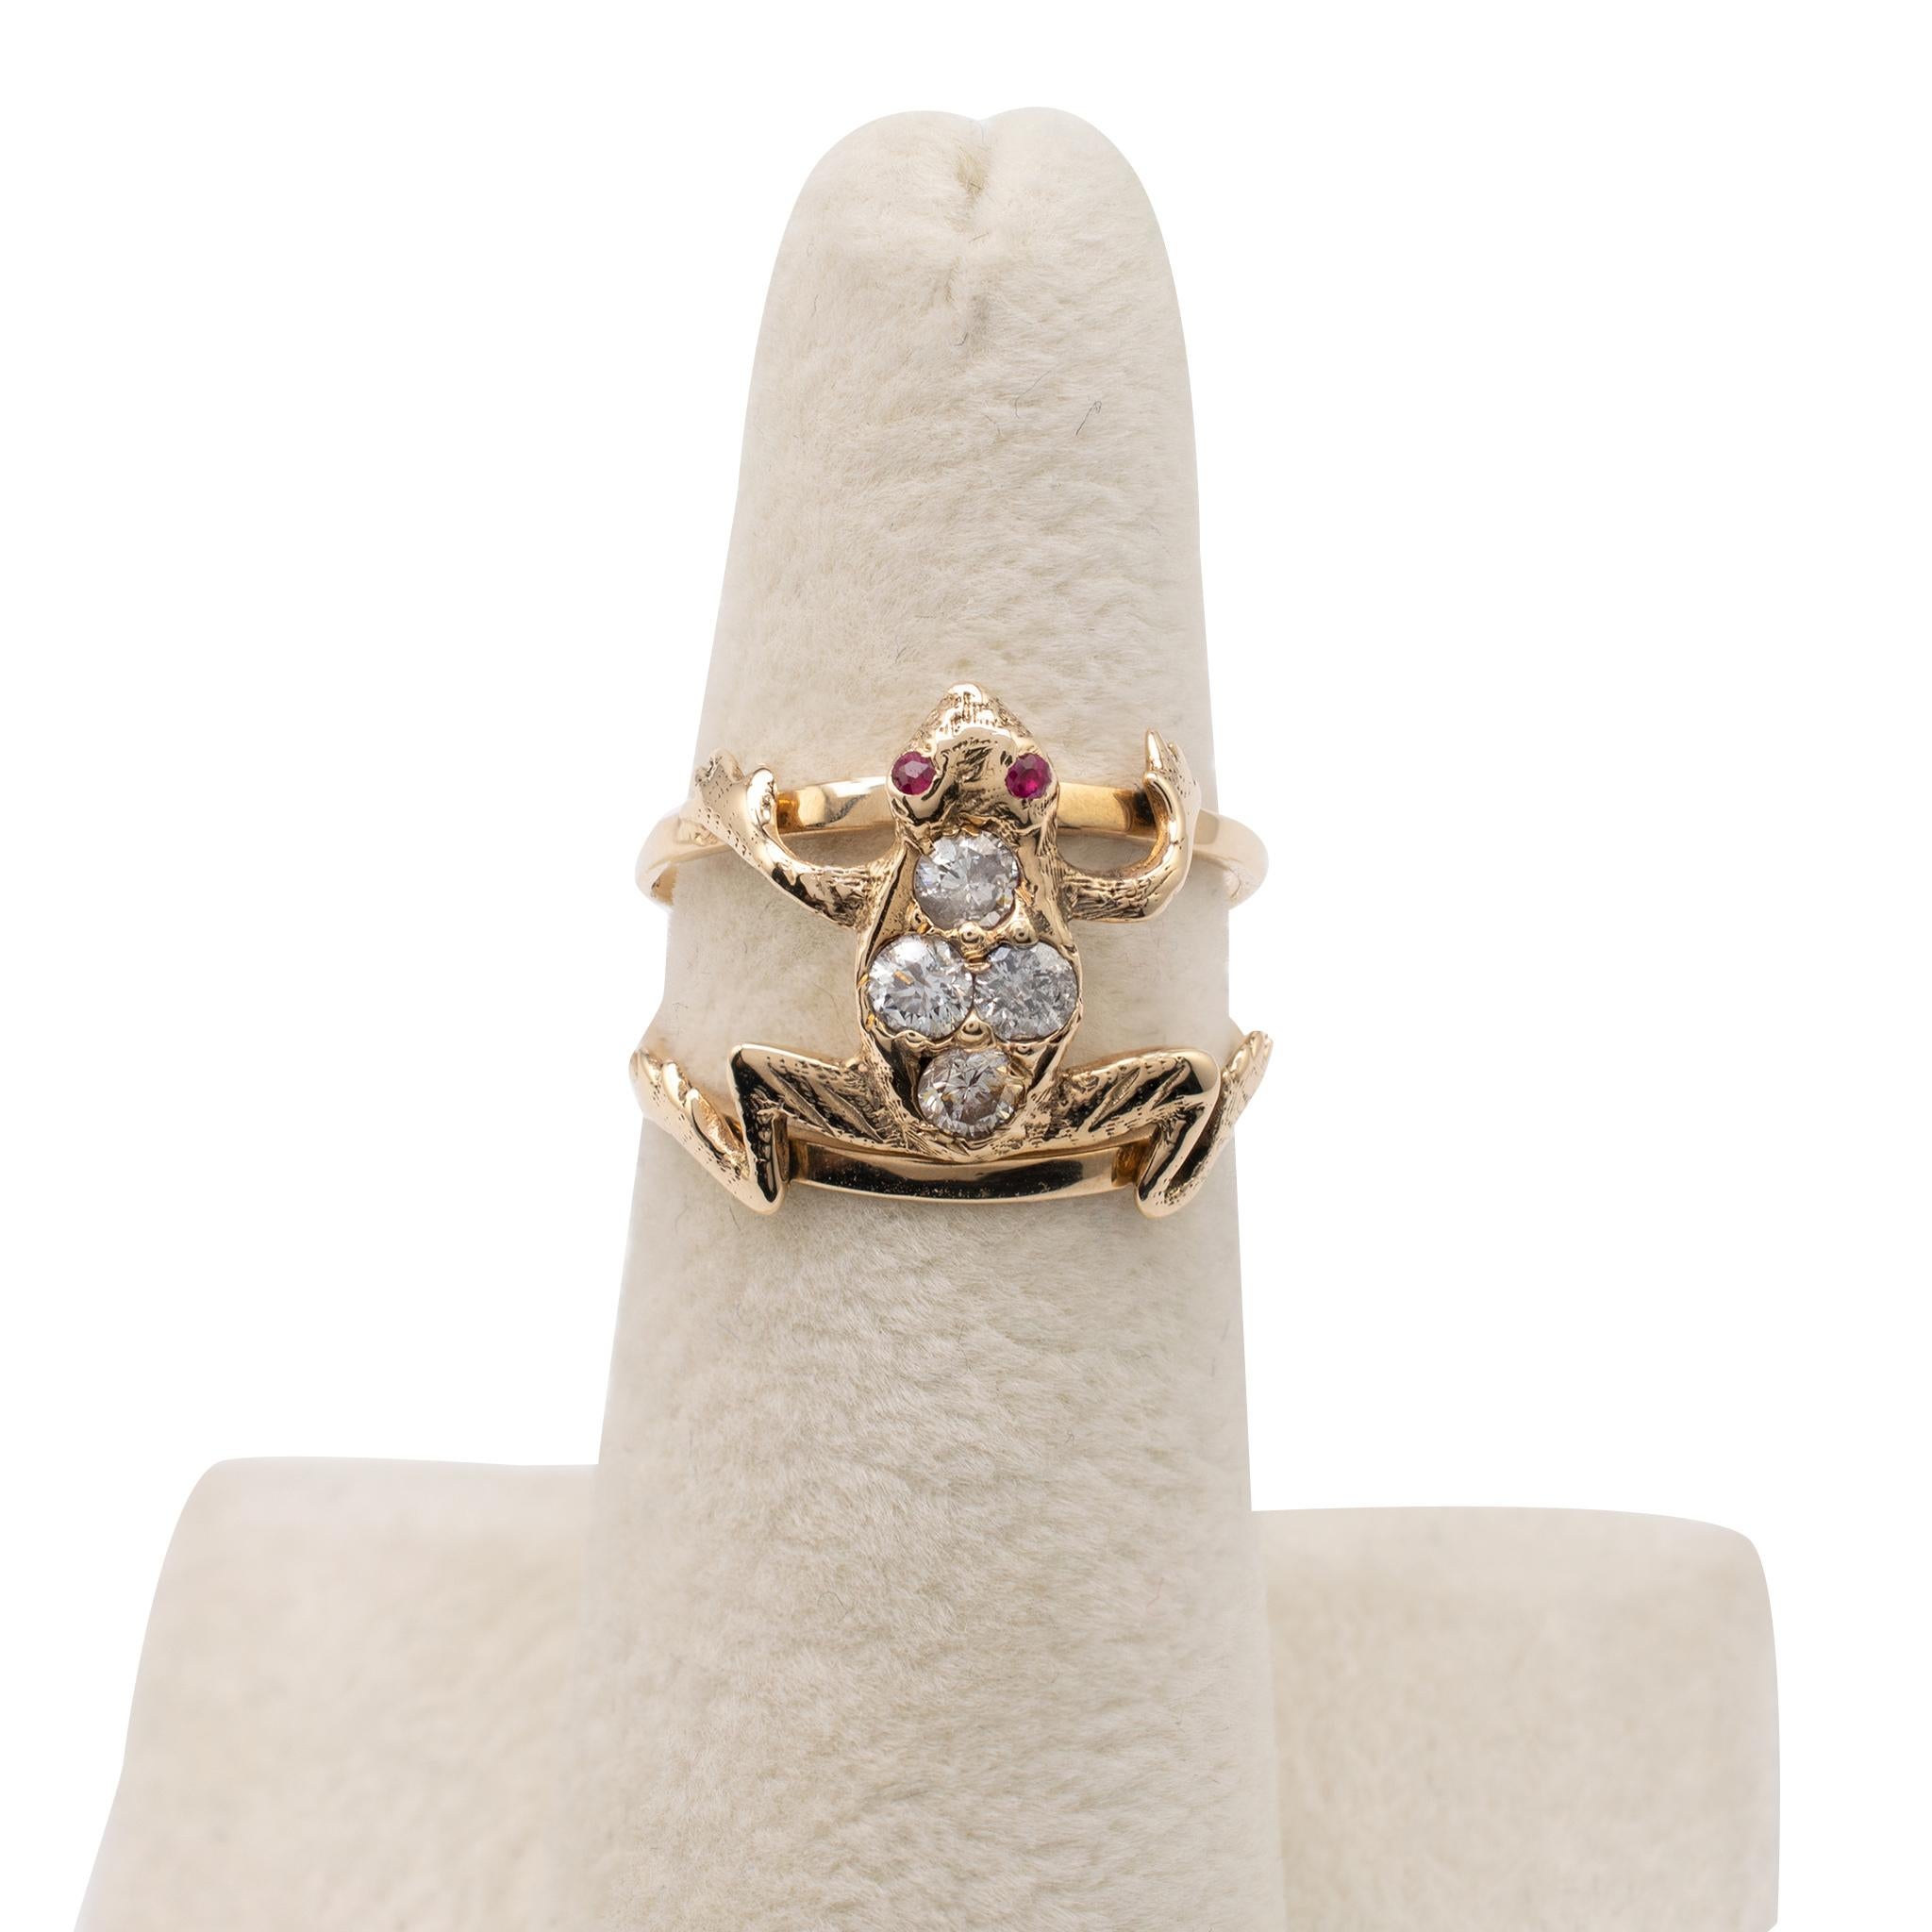 Diamond & ruby frog ring modeled in 15 karat gold.

The frog is realistically modeled and positioned and supported on a split open band. It is set with 4 round-cut 0.10ct diamonds in a quatrefoil arrangement to its back with complimenting rich